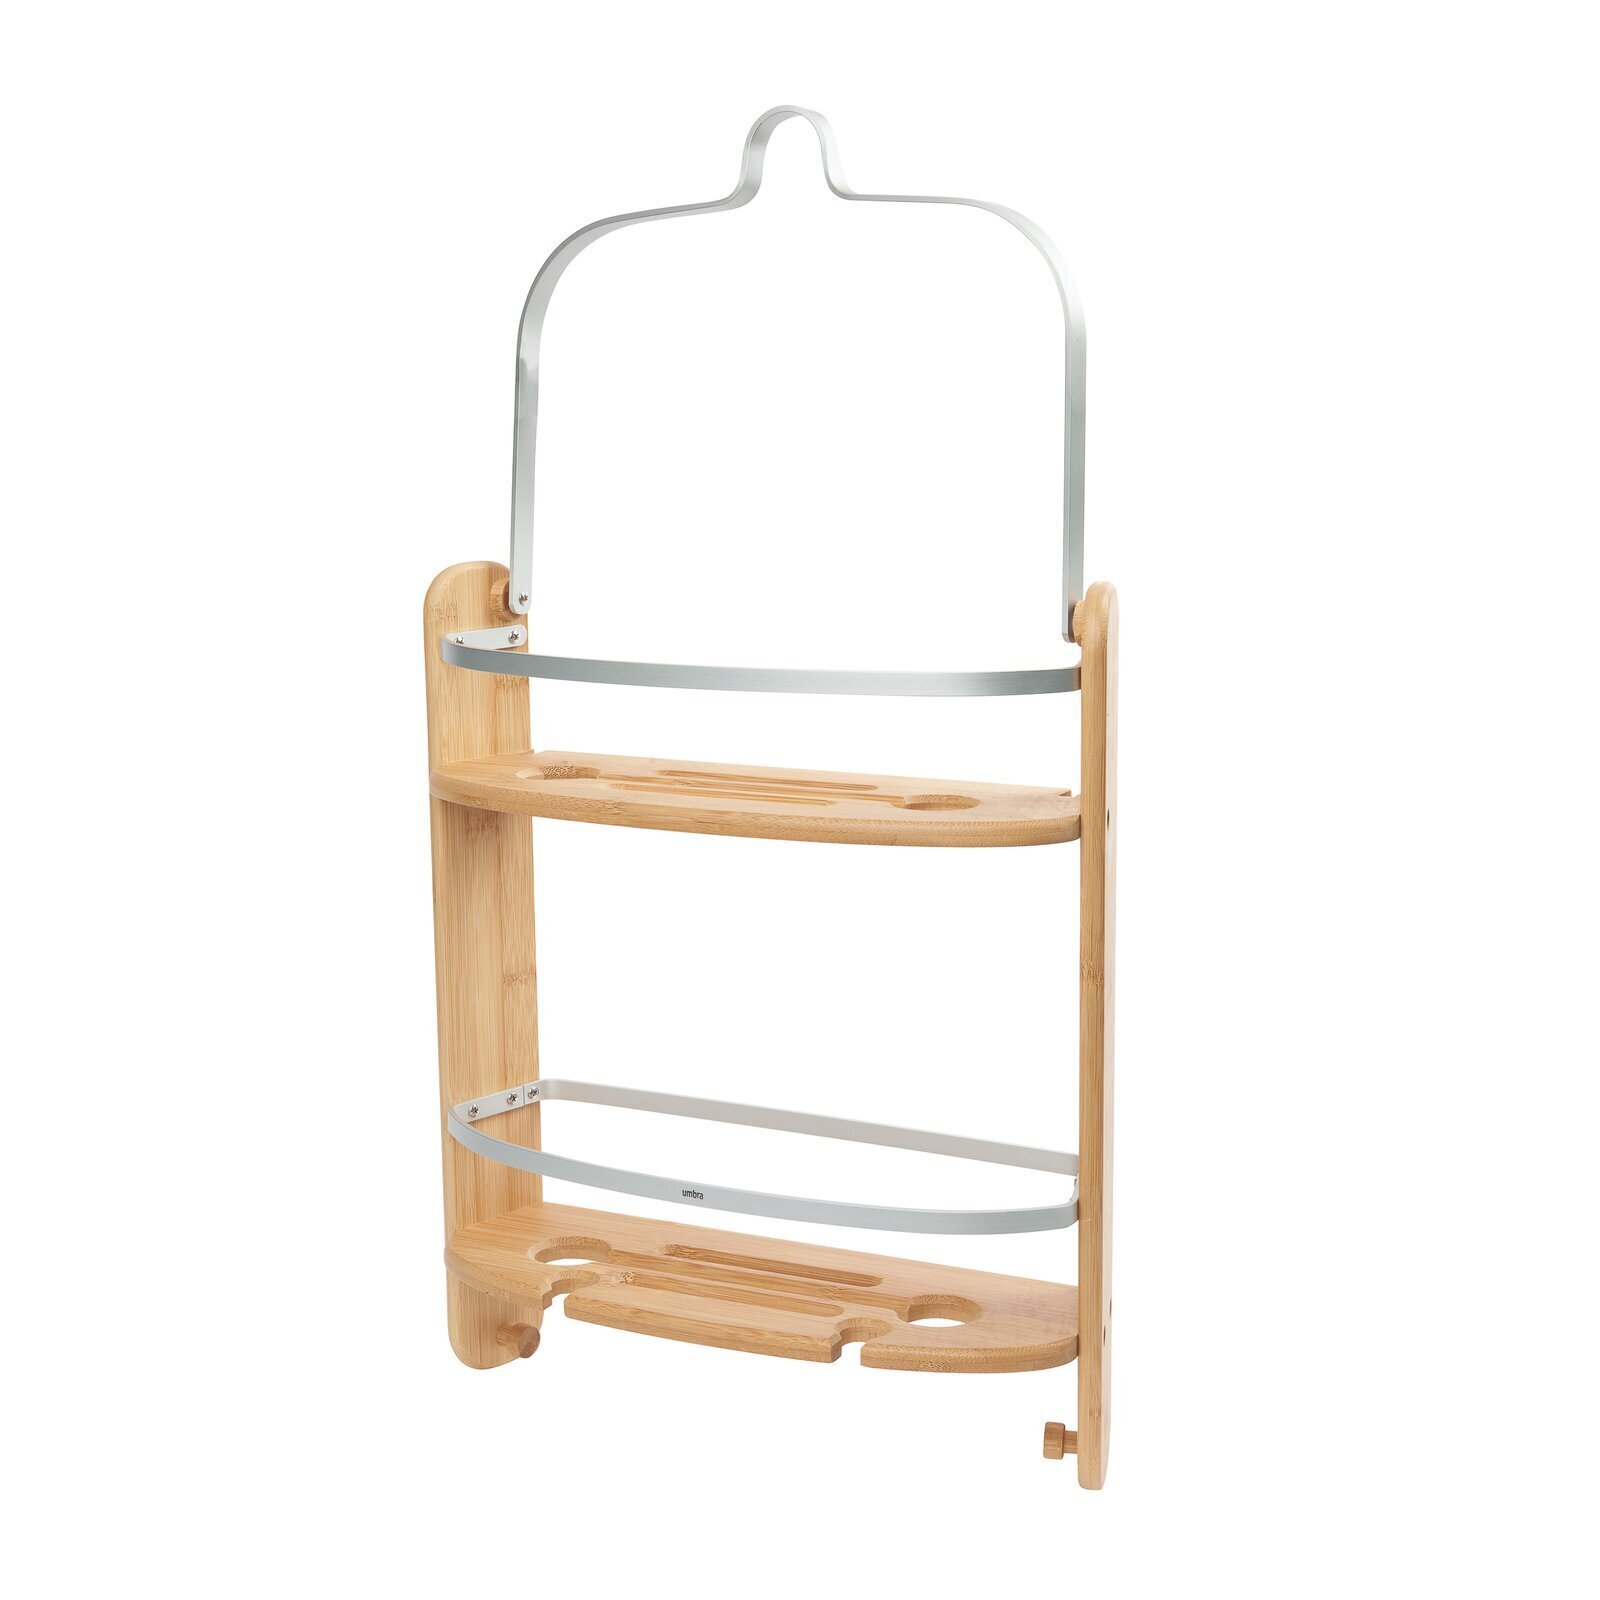 Wooden Hanging Shower Caddy With Metal Accents